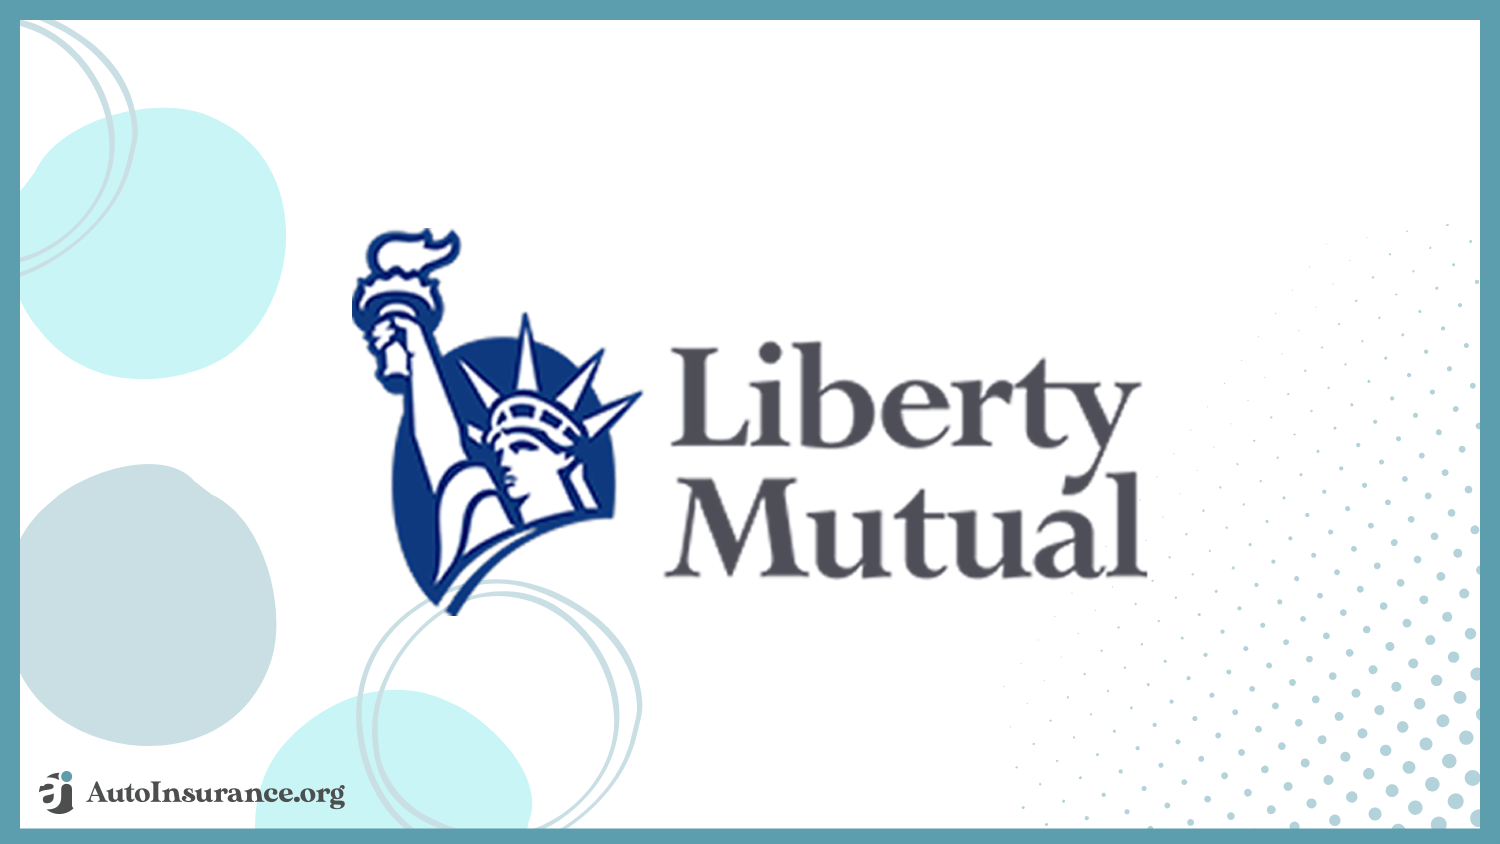 Liberty Mutual best companies for bundling home and auto insurance